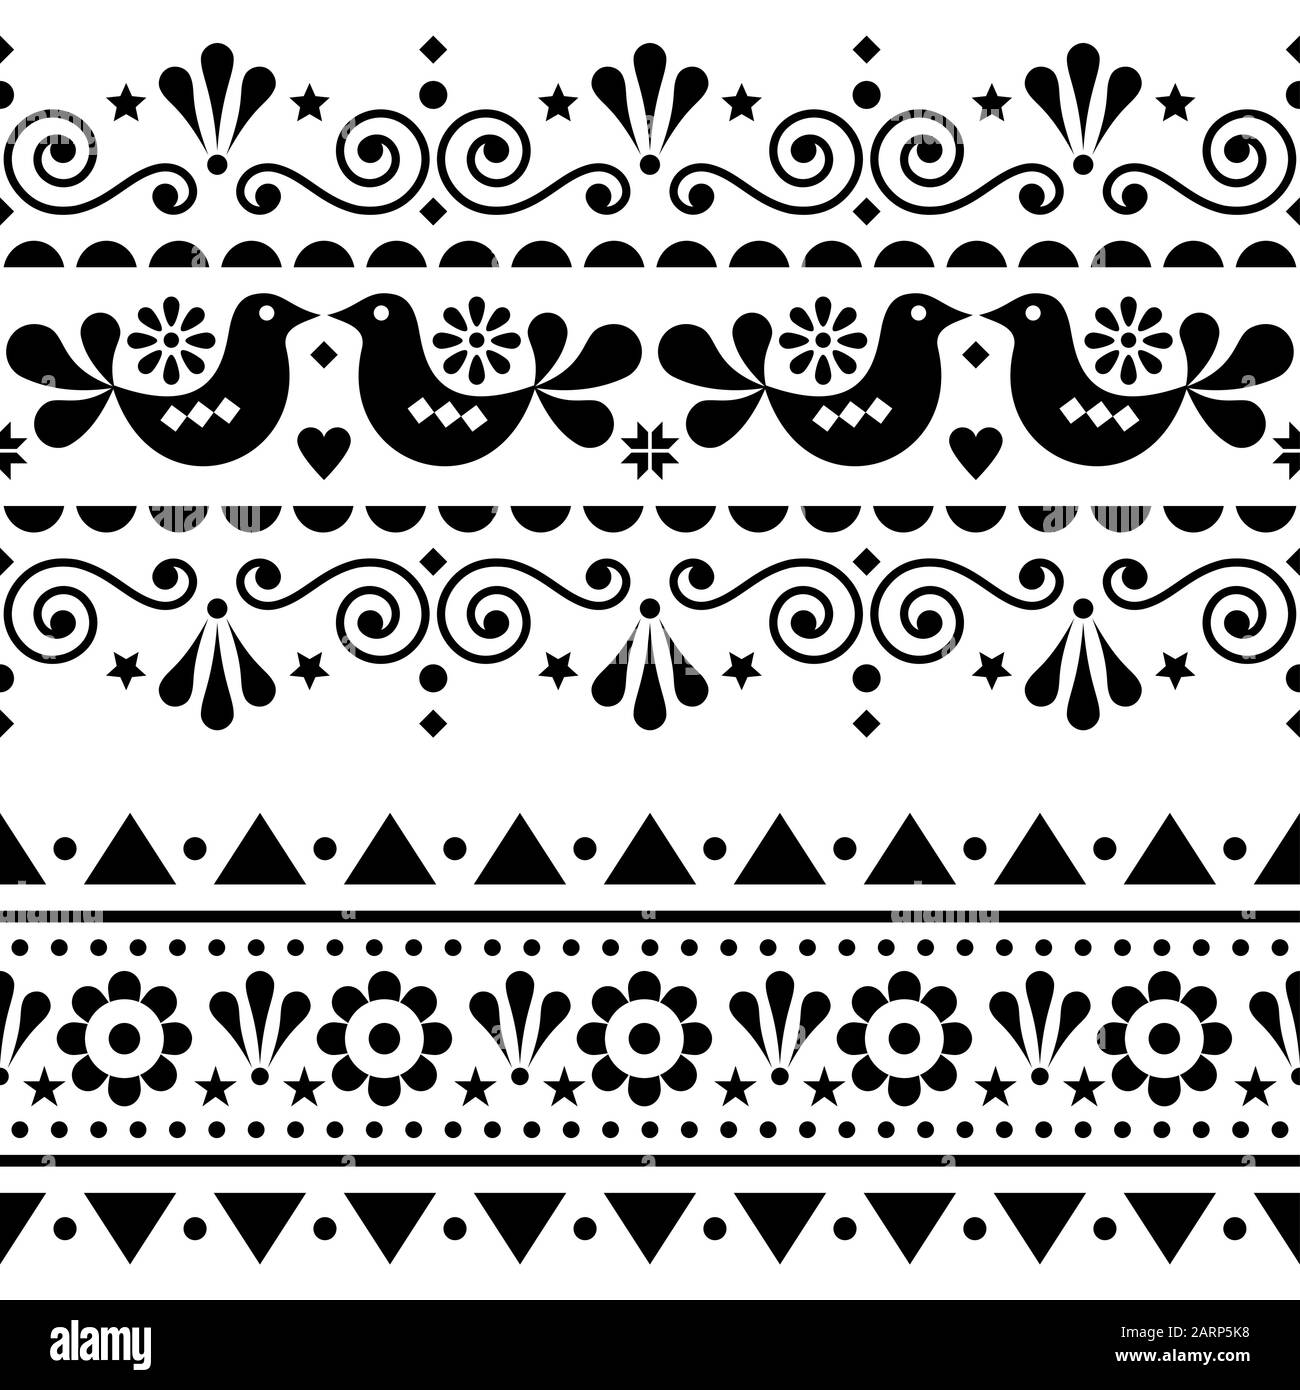 Fresh cute patterns black and white Scandinavian Folk Seamless Vector Long Pattern Repetitive Floral Cute Nordic Design With Birds In Black On White Background Stock Image Art Alamy